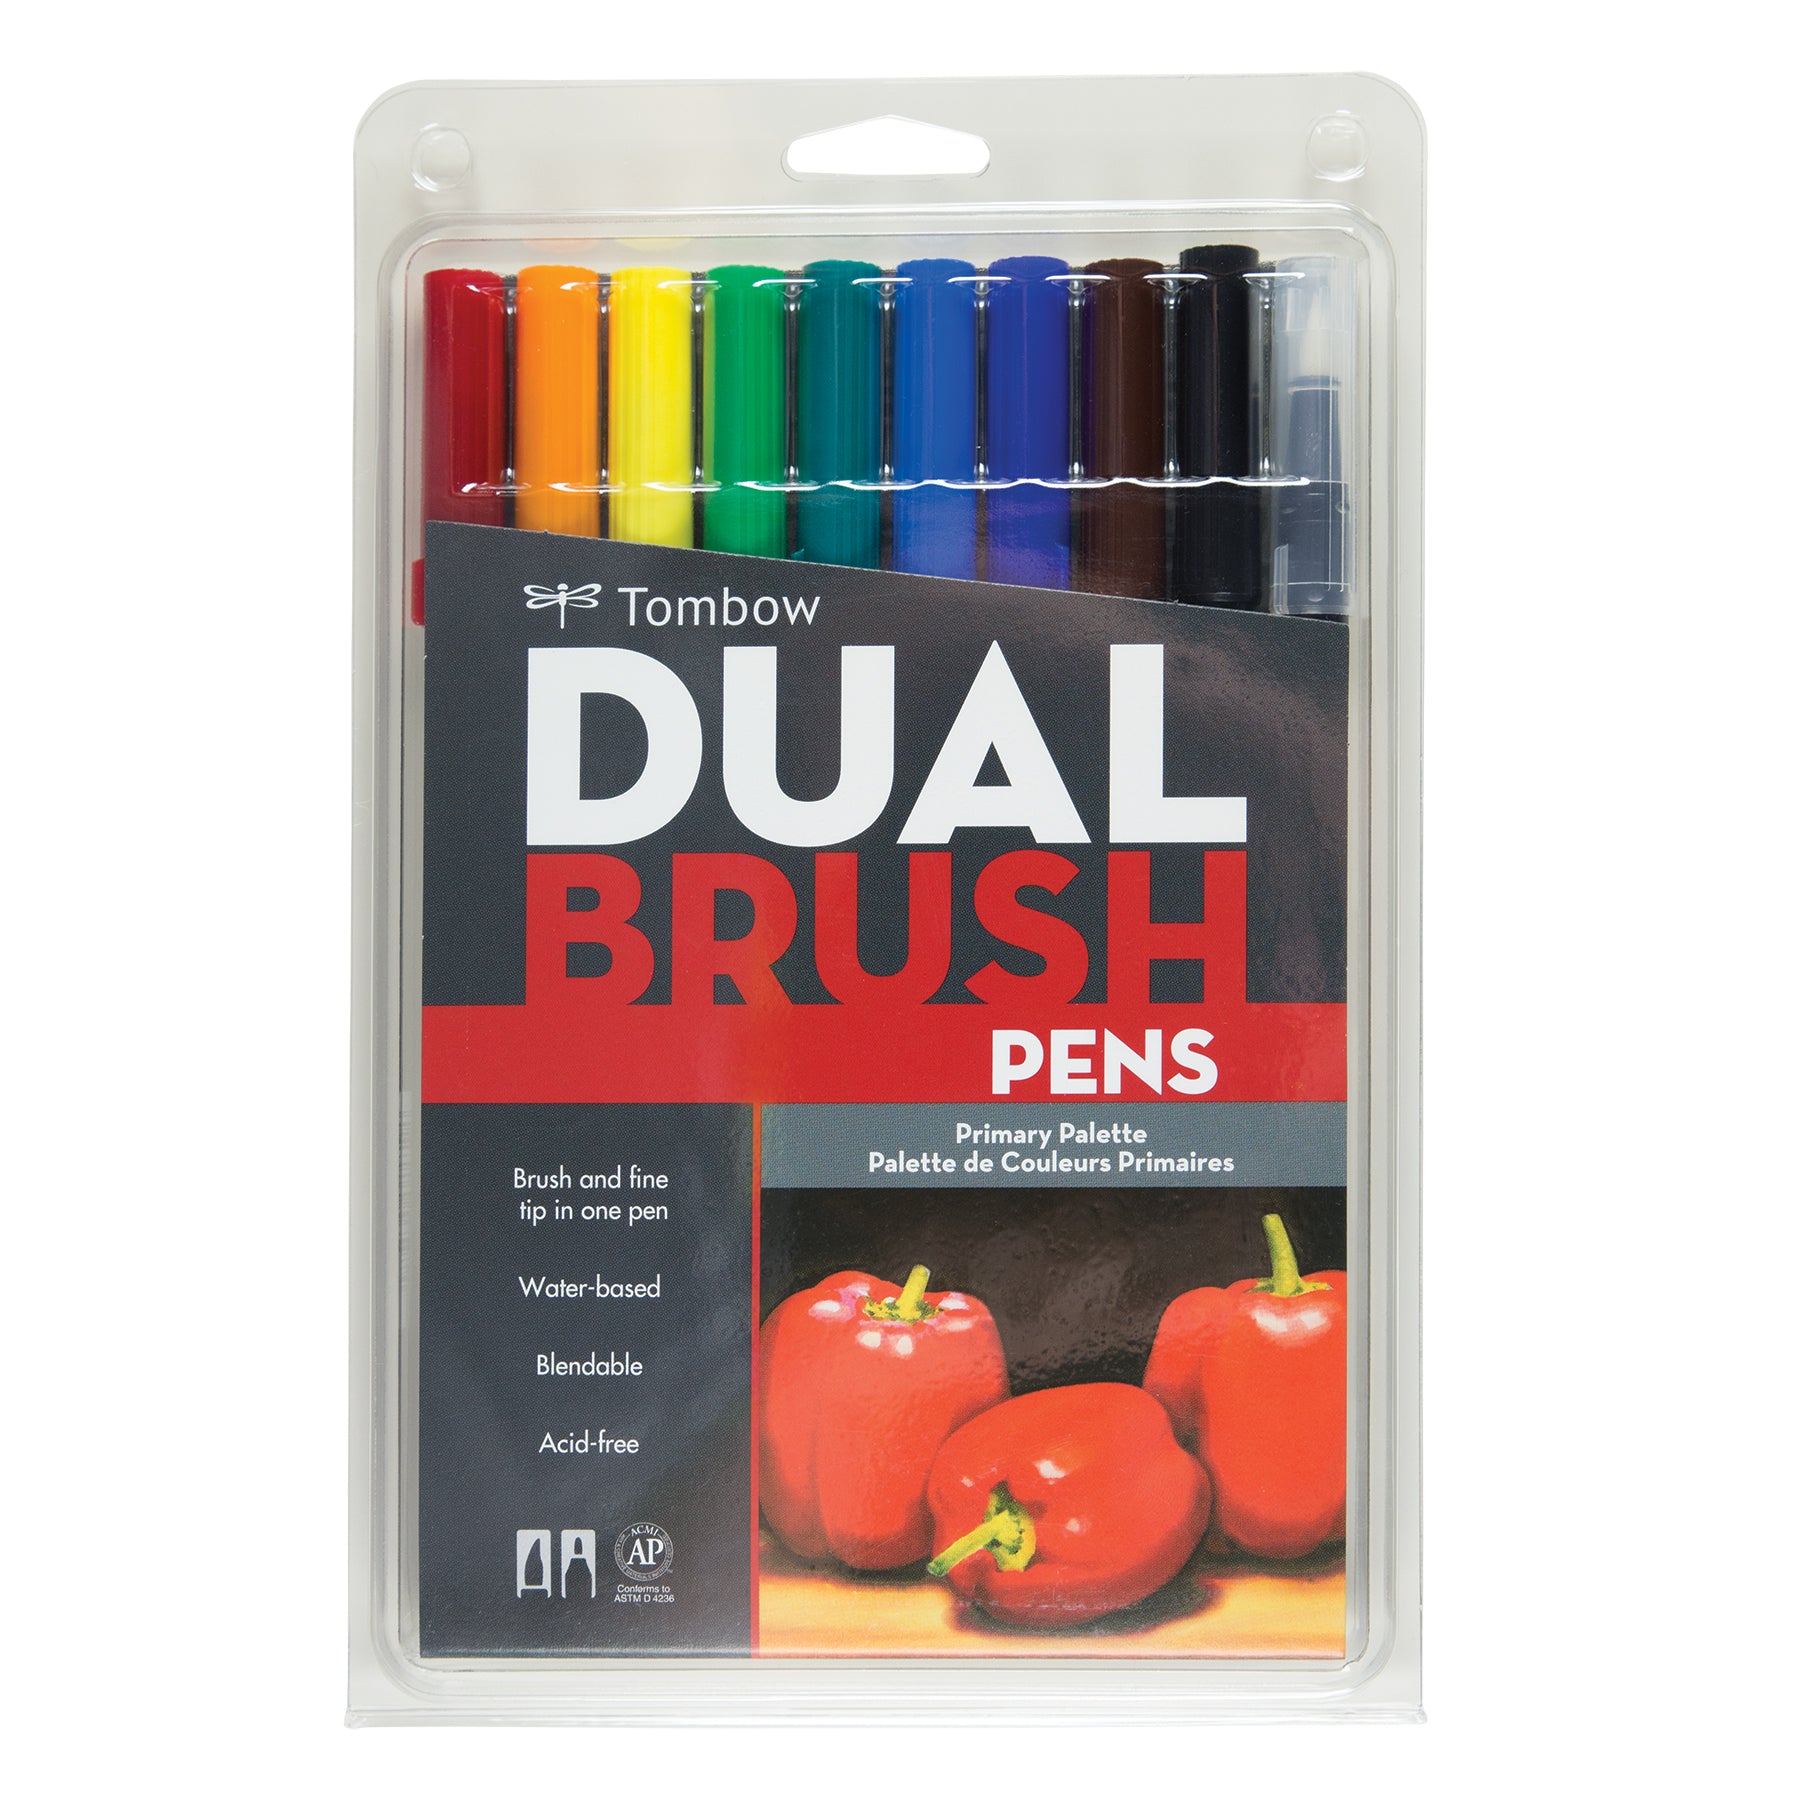  Tombow Dual Water Based Markers, Twin Tip, Primary